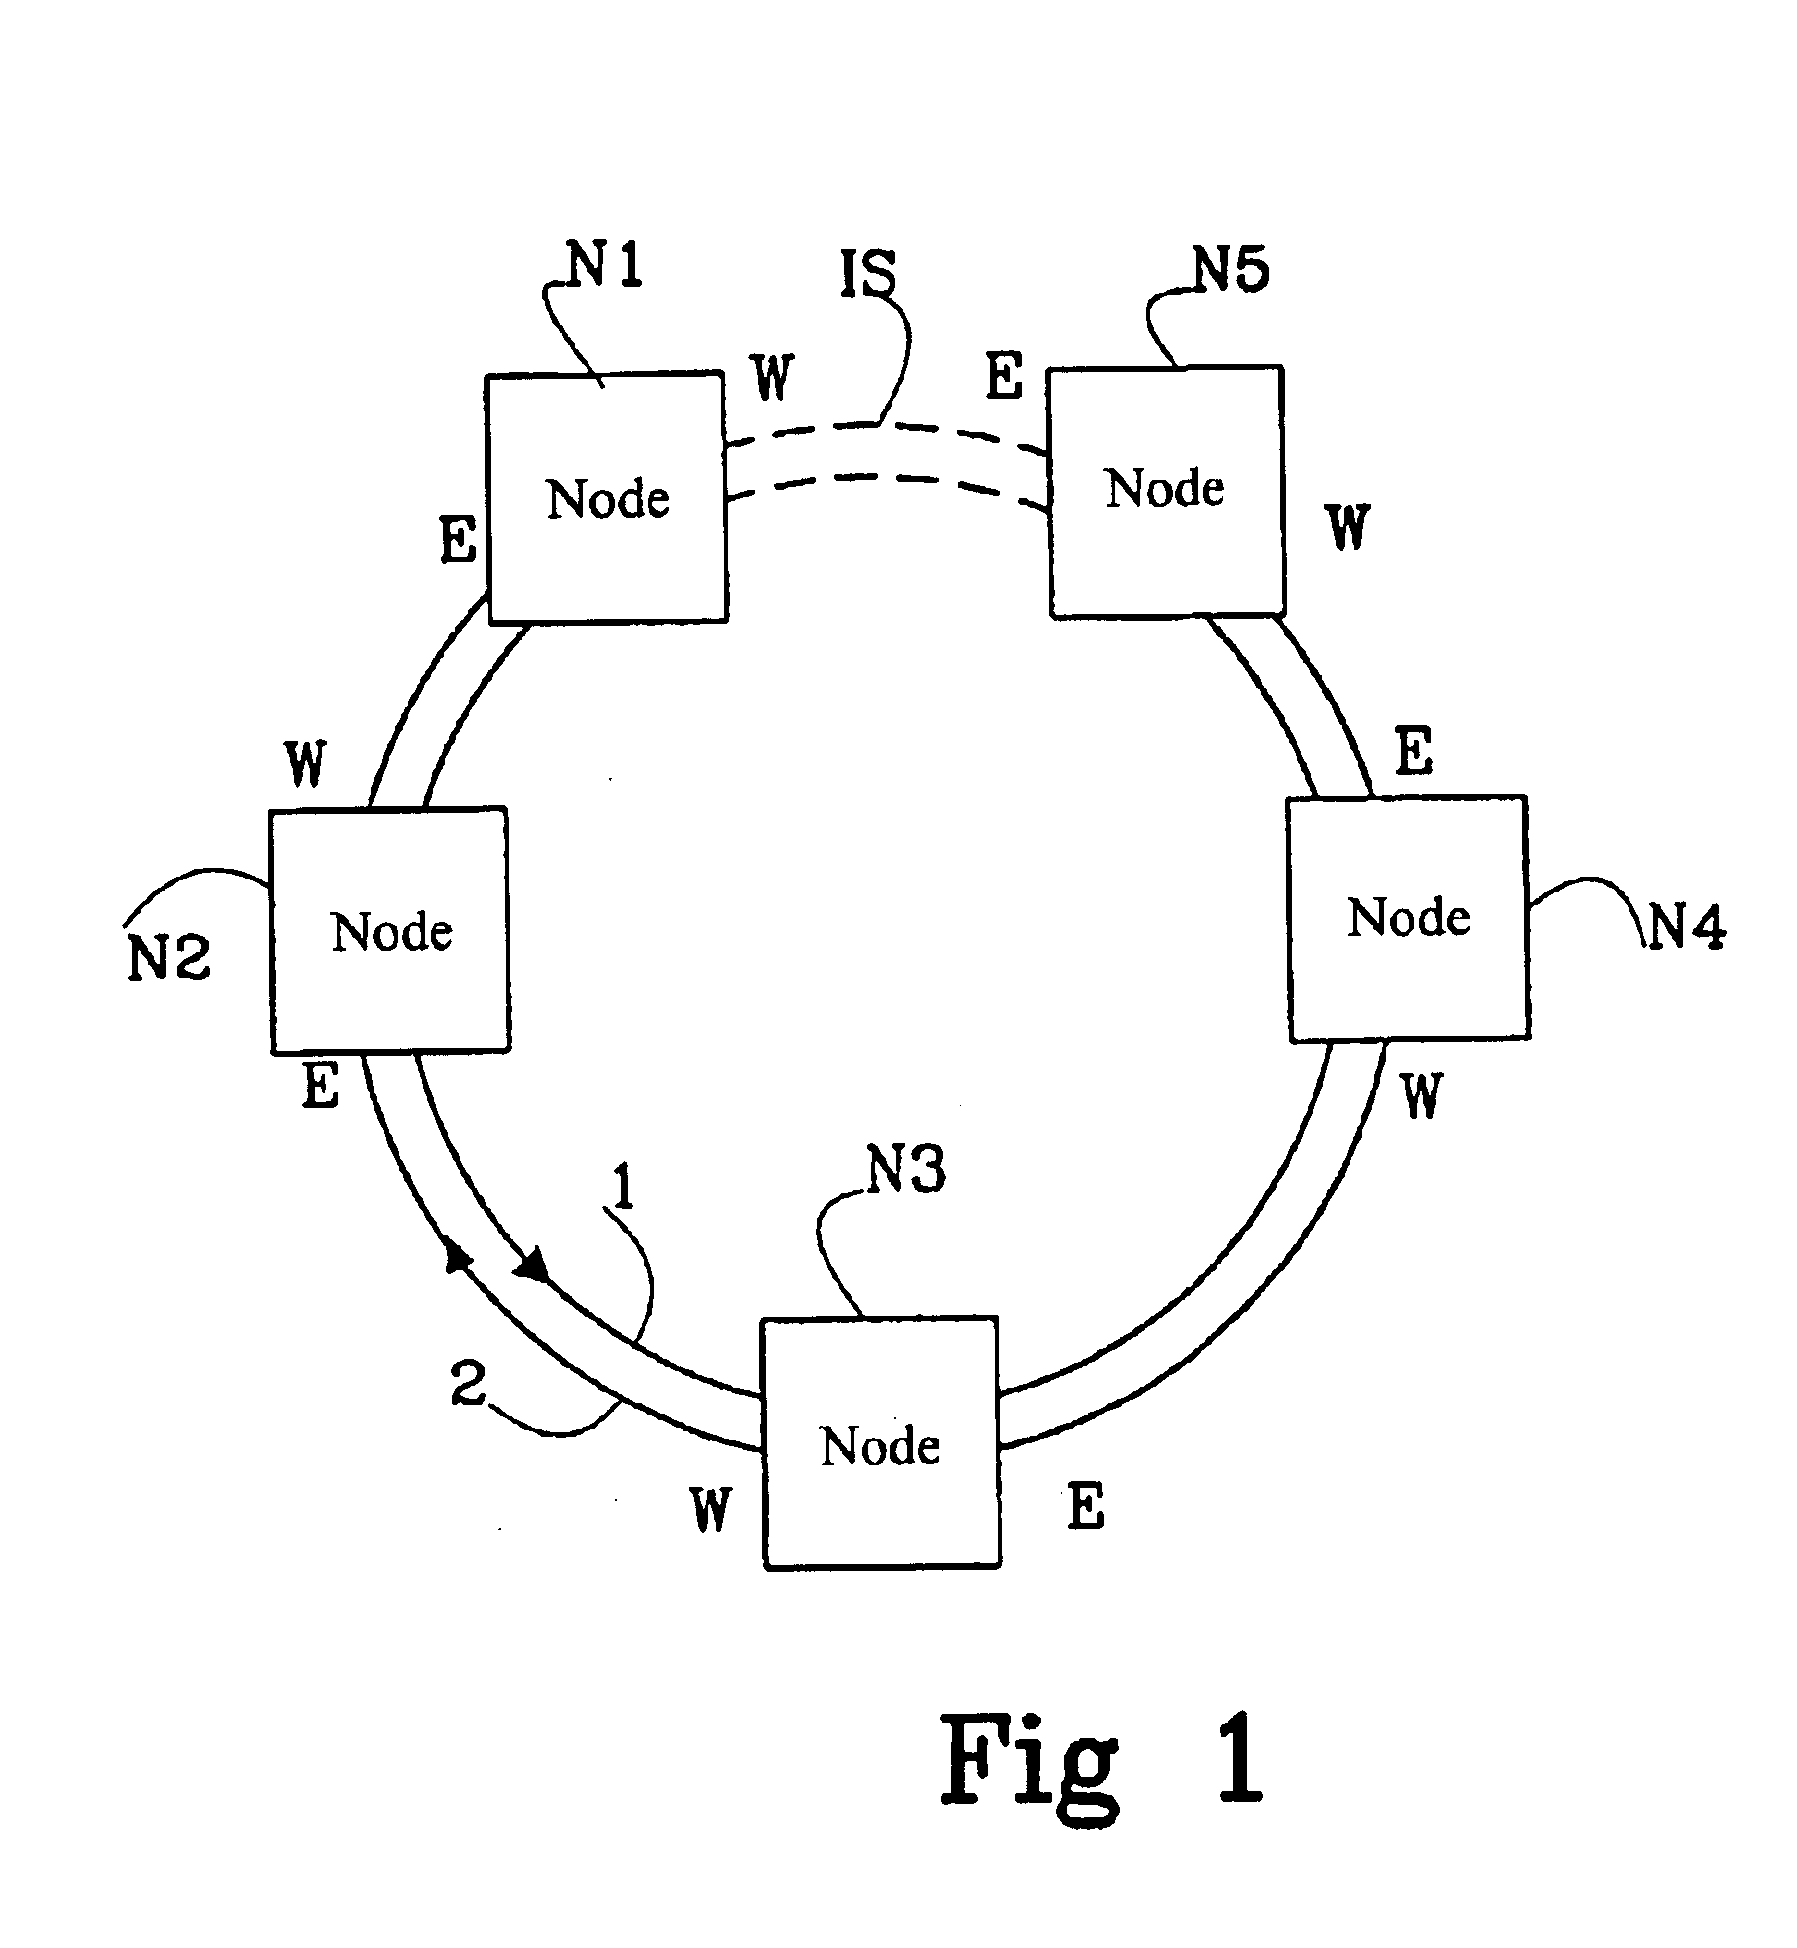 Self-healing ring network and a method for fault detection and rectifying